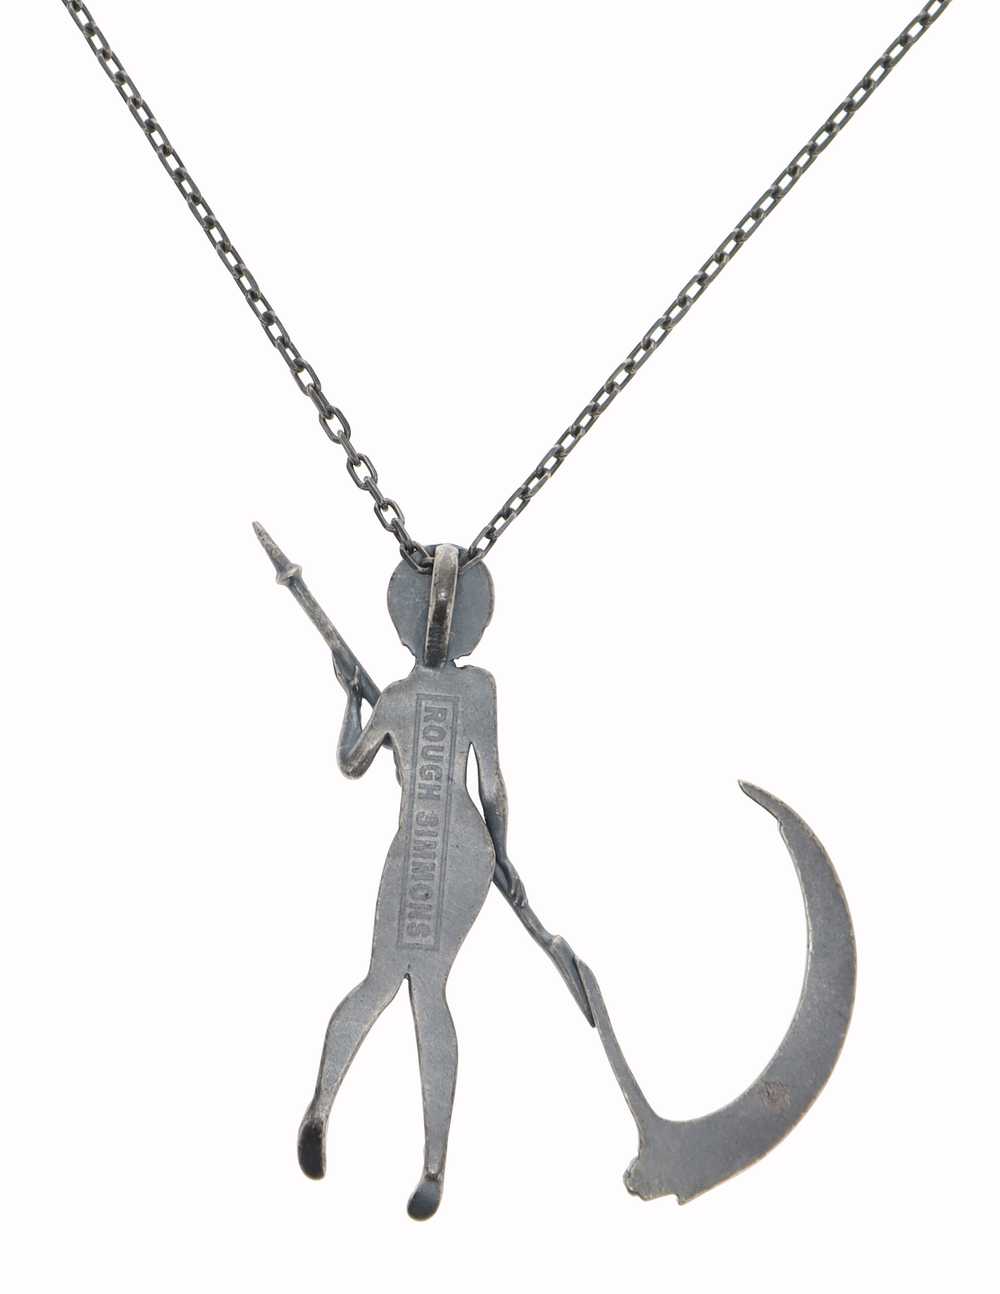 Rough Simmons Evangelion Silver Scythe Necklace - image 2